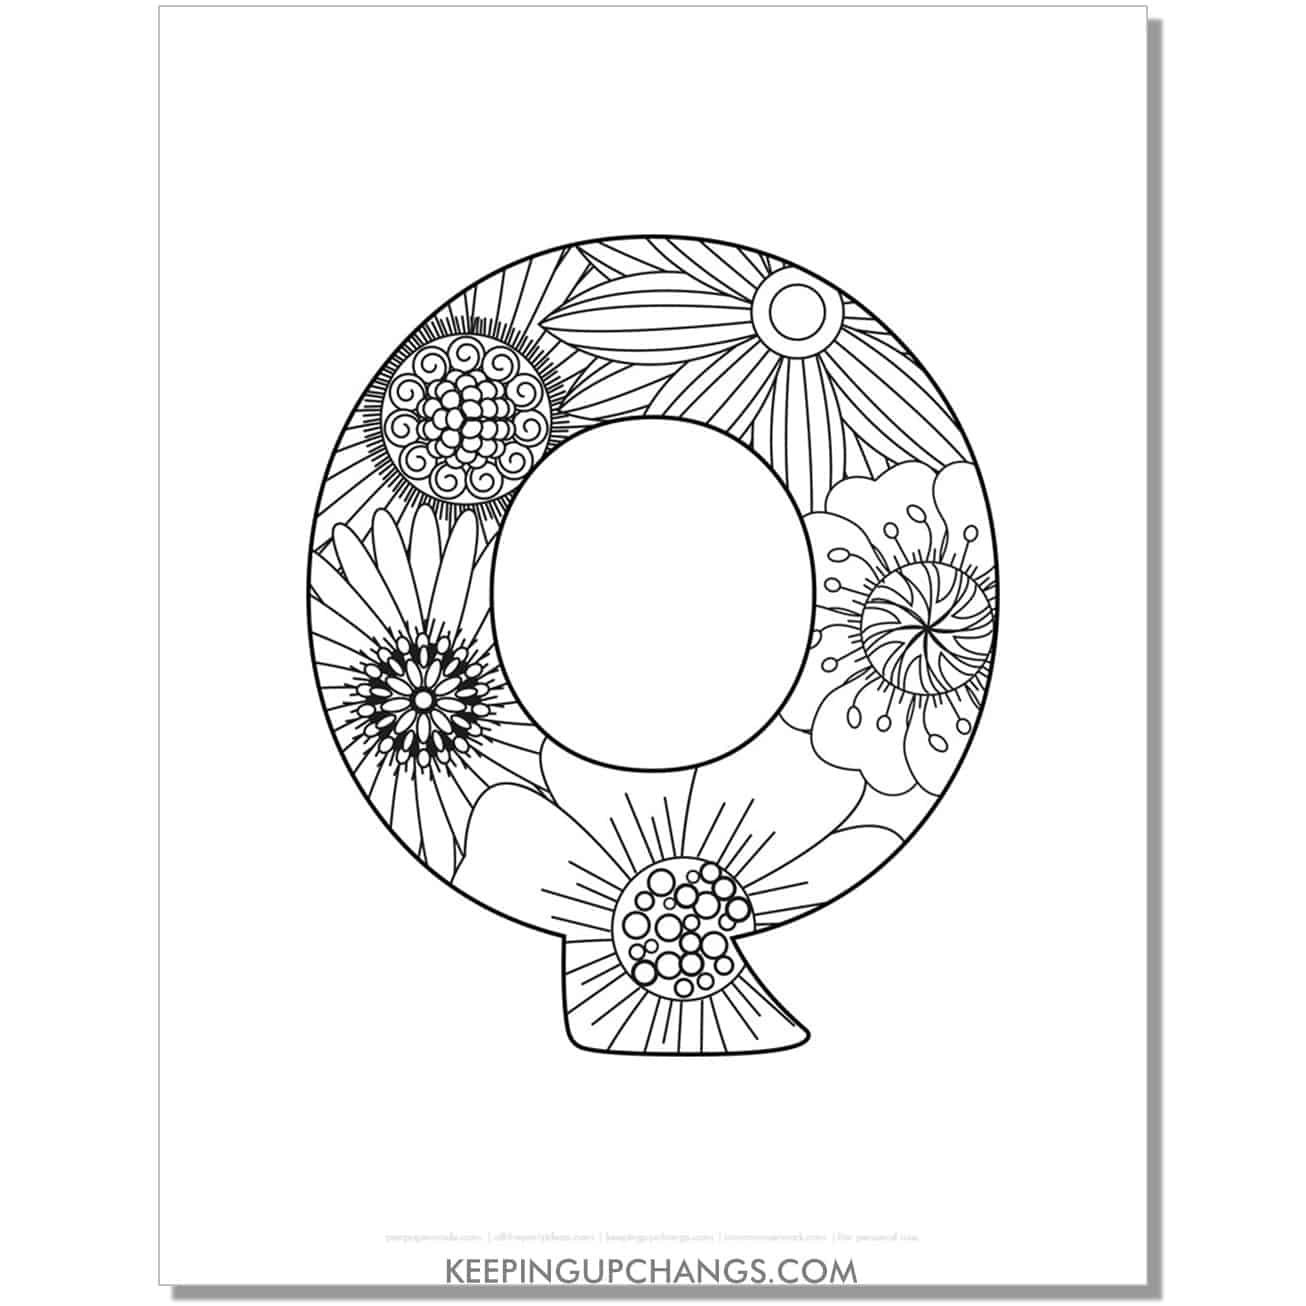 free letter q to color, complex mandala zentangle for adults.